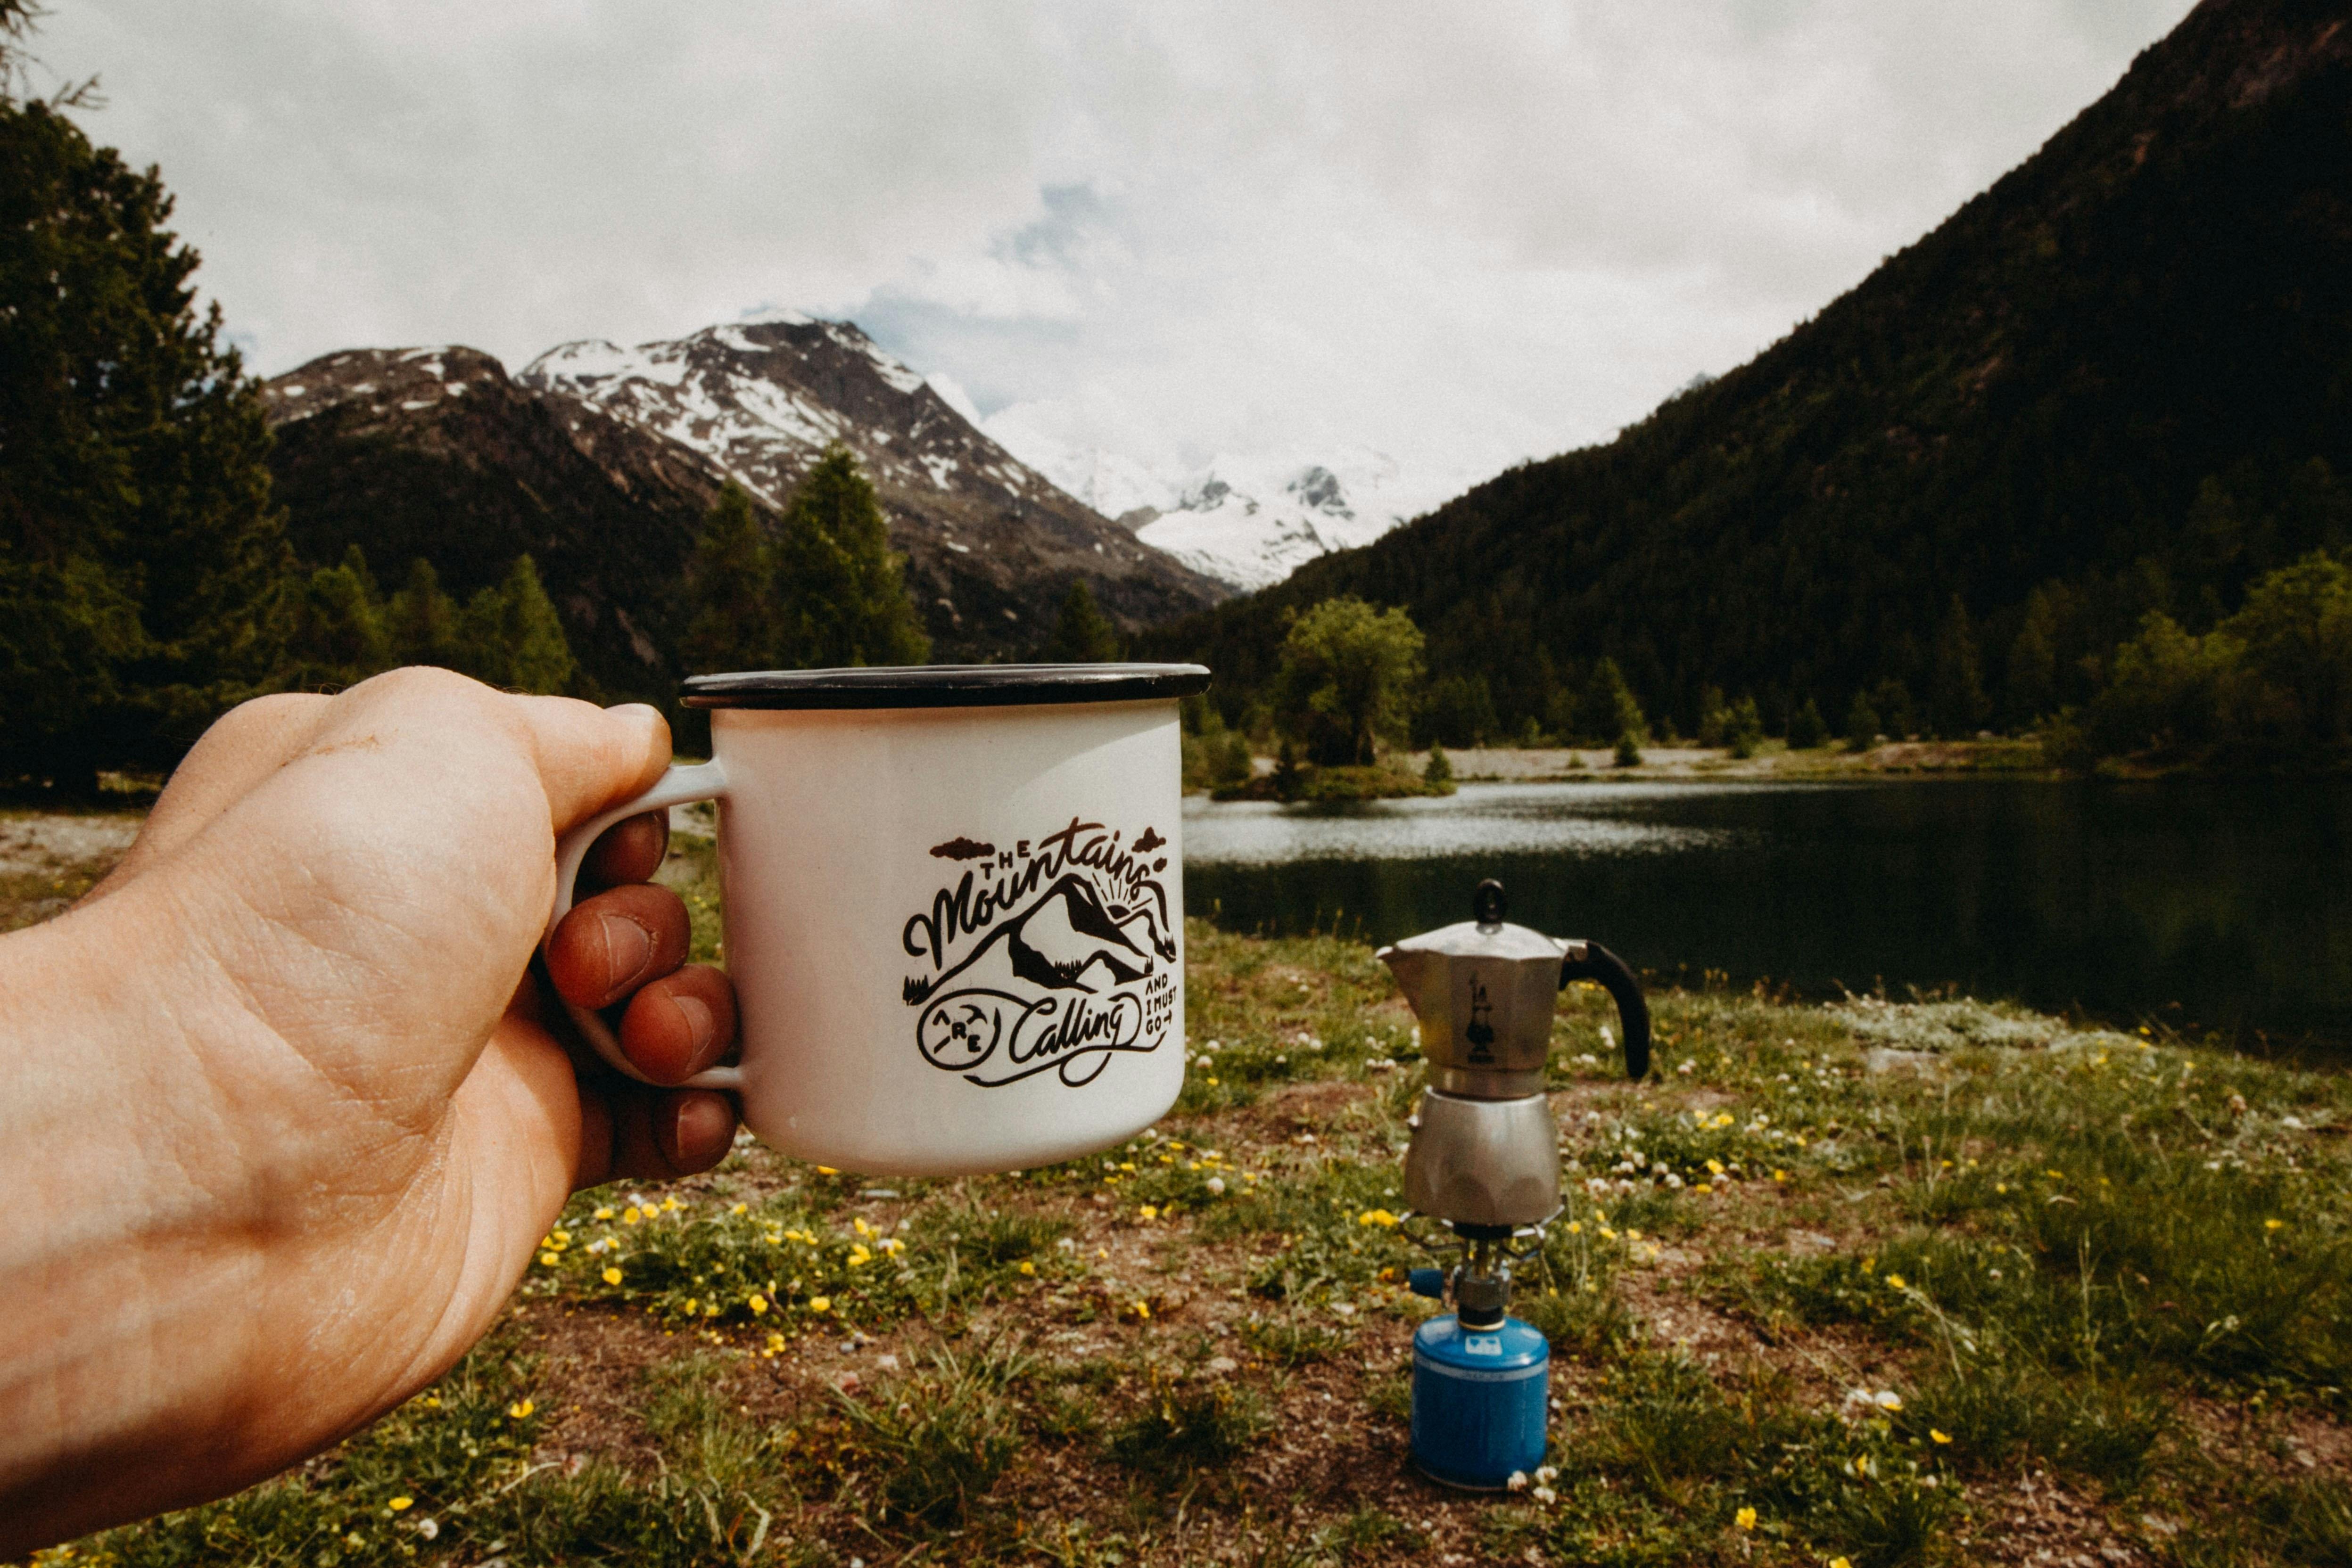 A person extends a mug towards a lake and mountains. On the ground sits a coffee pot on a camp stove